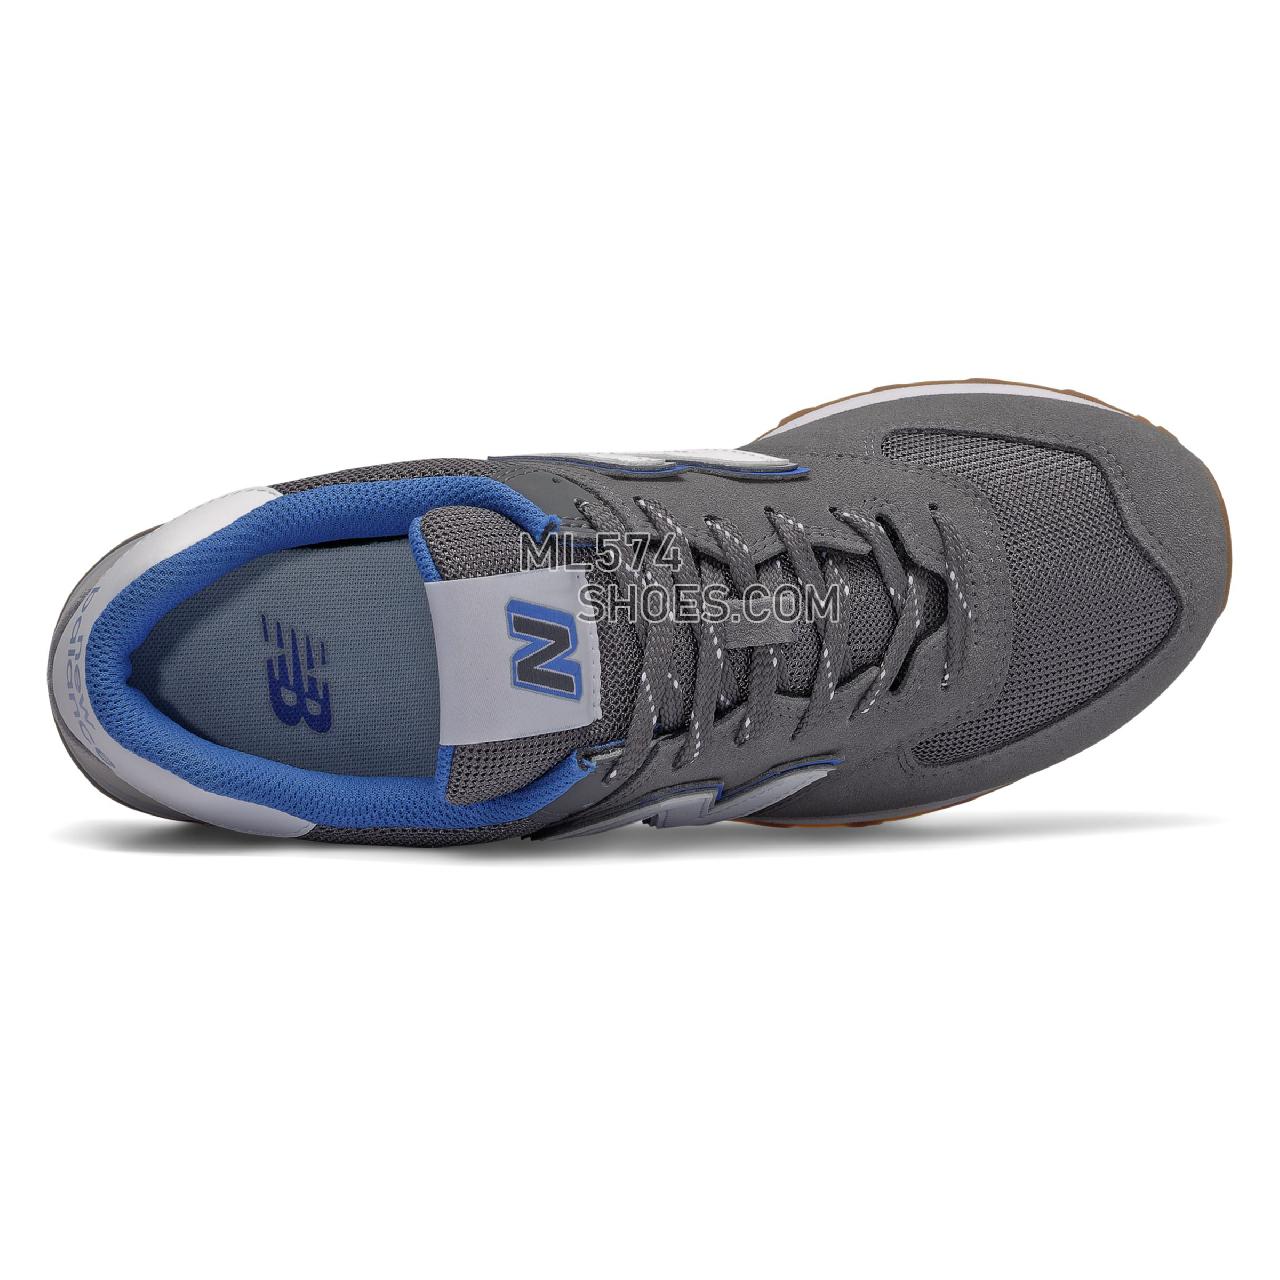 New Balance 574v2 - Men's Classic Sneakers - Lead with Faded Cobalt - ML574SKC